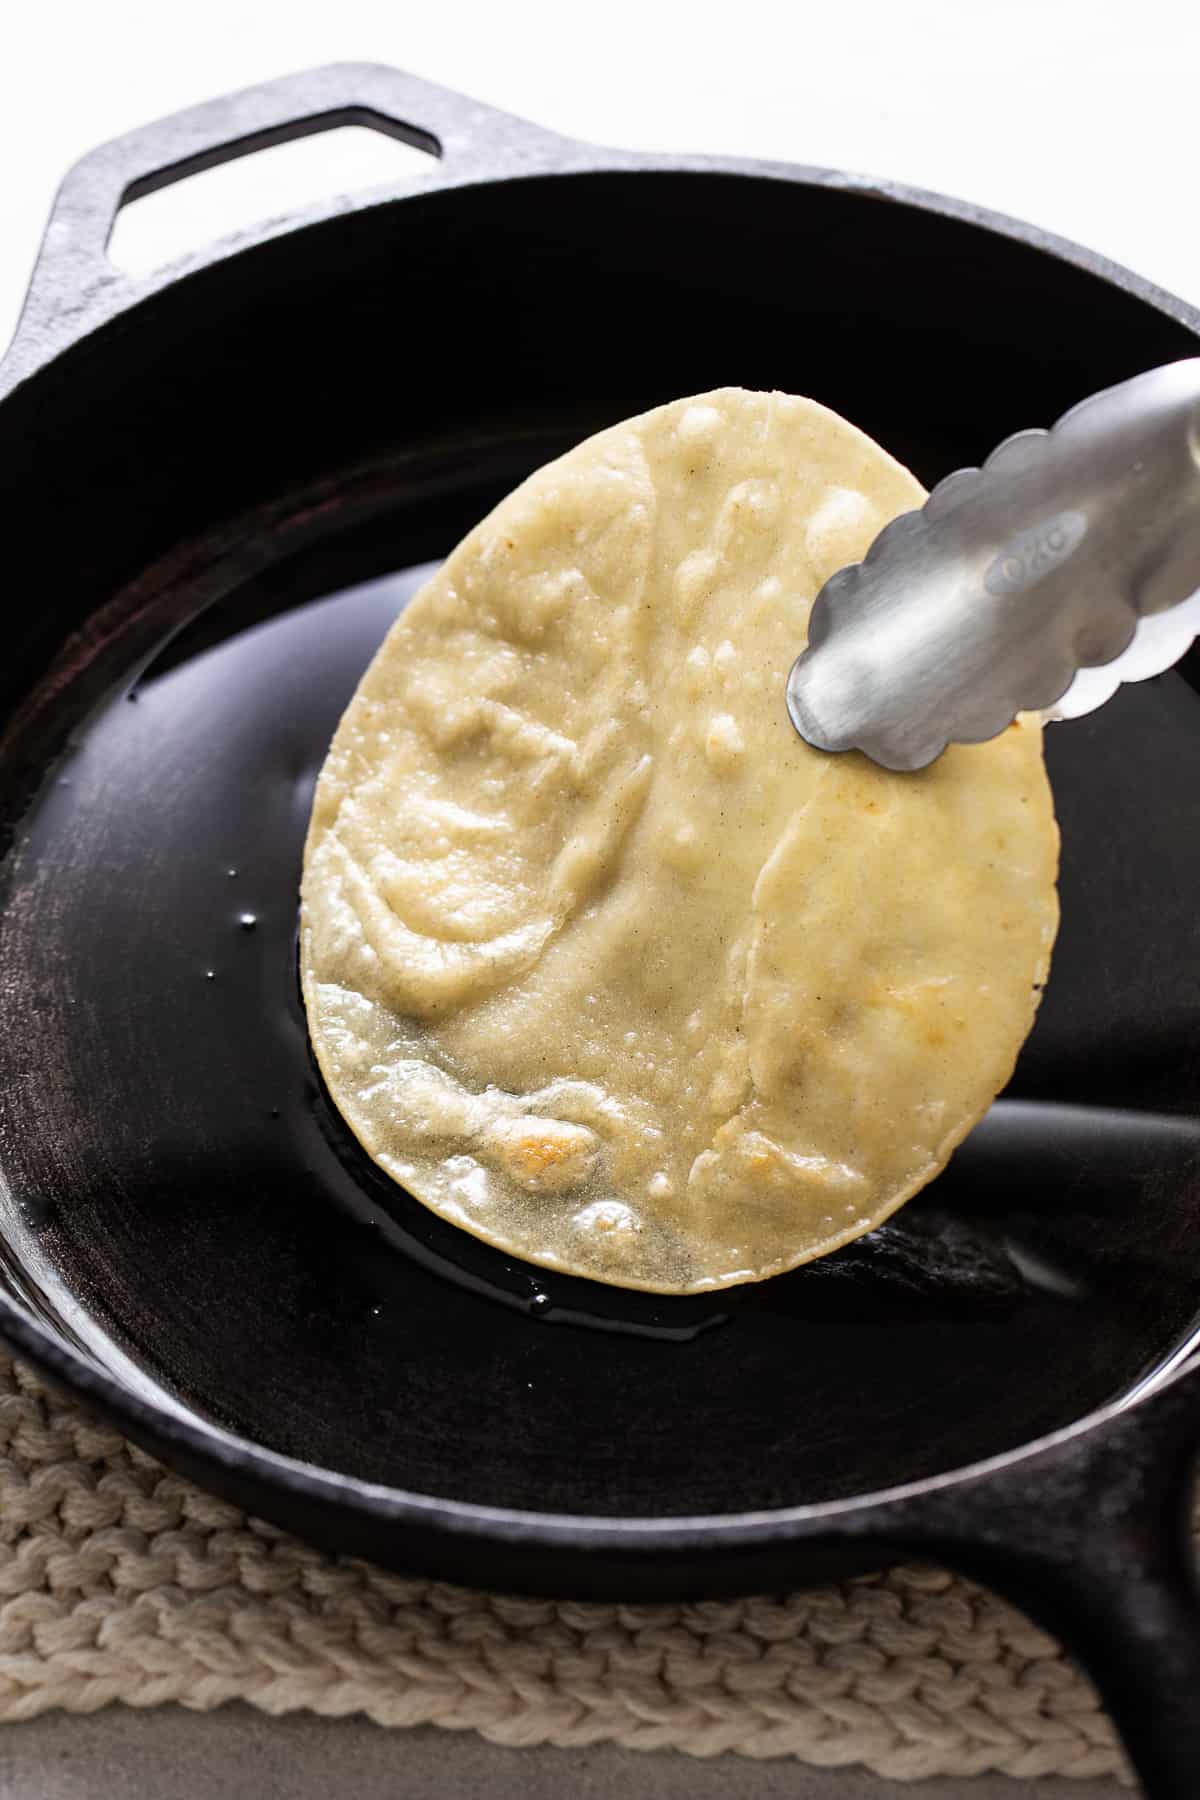 A corn tortilla lightly frying in a pan of oil.